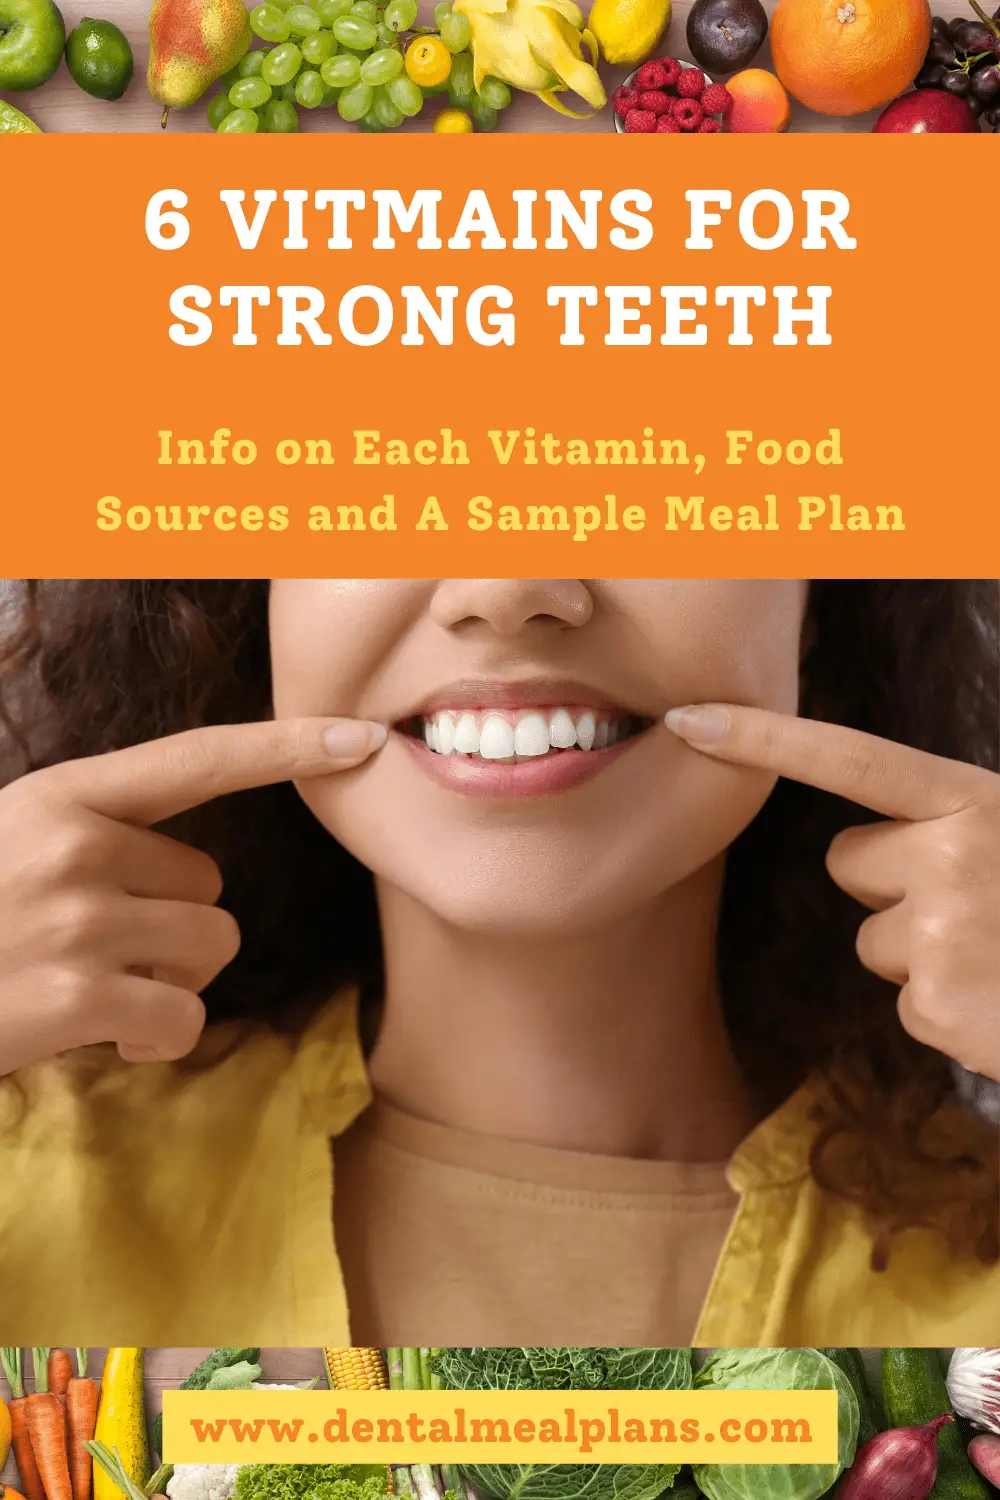 6 vitamins for strong teeth plus info on each vitamin, food sources and a sample meal plan